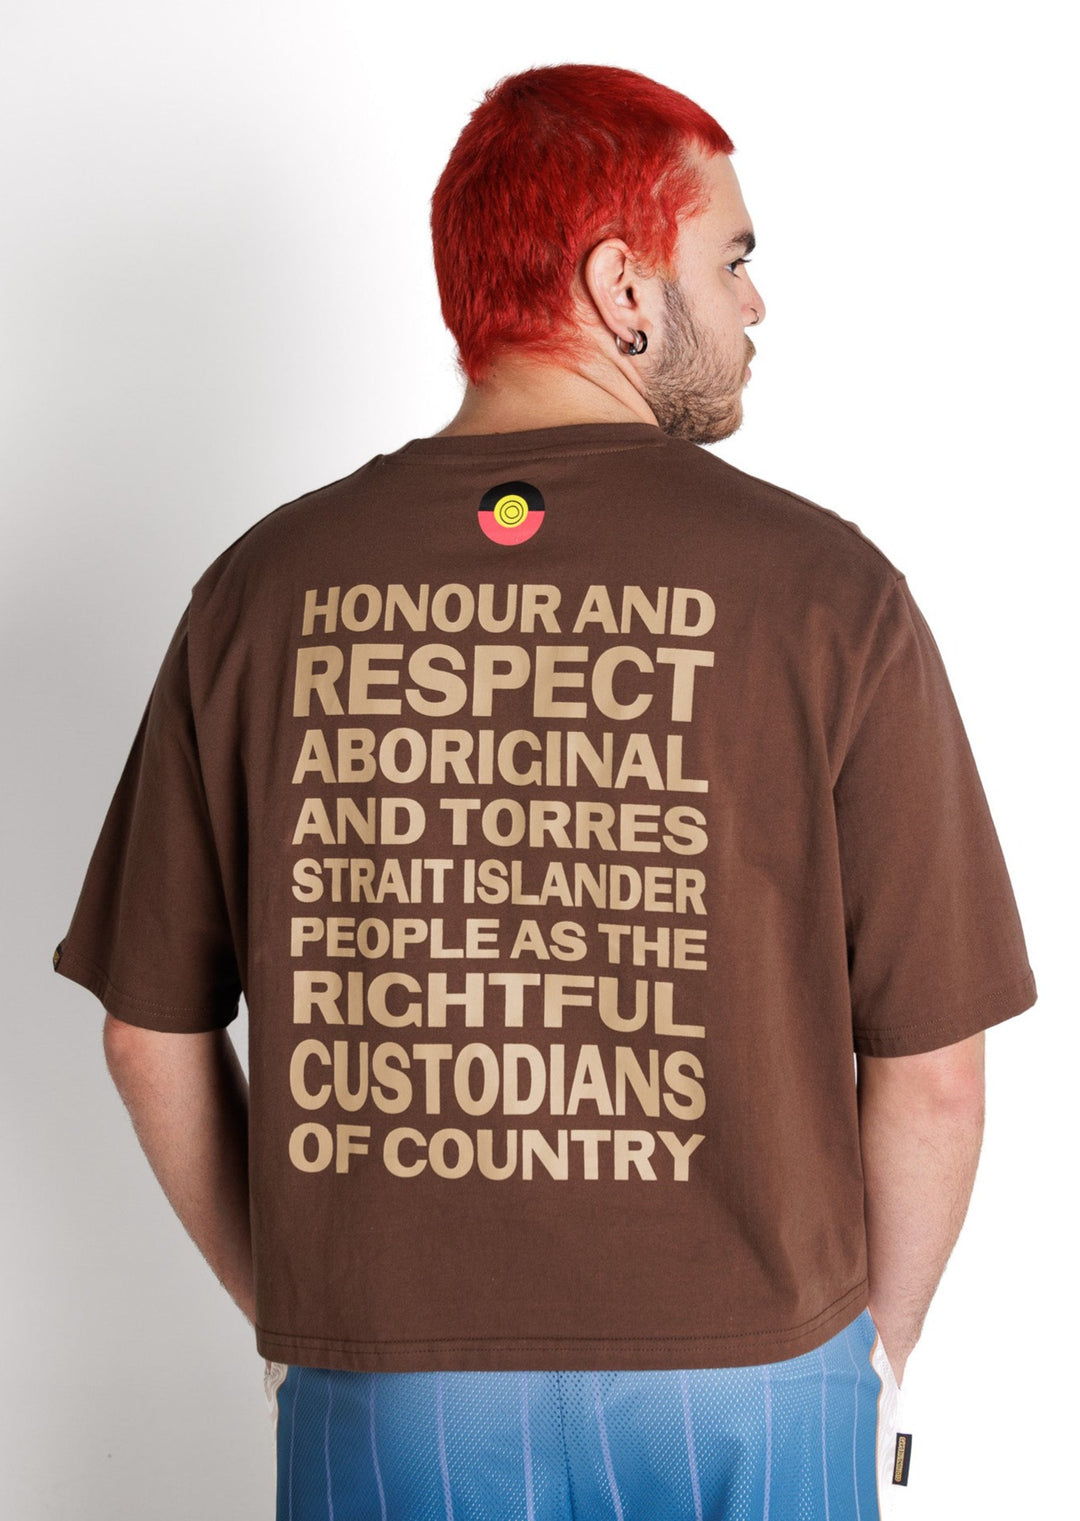 Clothing The Gaps. Honour Country Crop Tee. Chocolate brown cropped tee. On front in contrasting light brown 'Honour Country' small in centre across chest in bold capital text. On back in same text big back piece 'Honour and respect Aboriginal and Torres Strait Islander people as the rightful custodians of country.' 